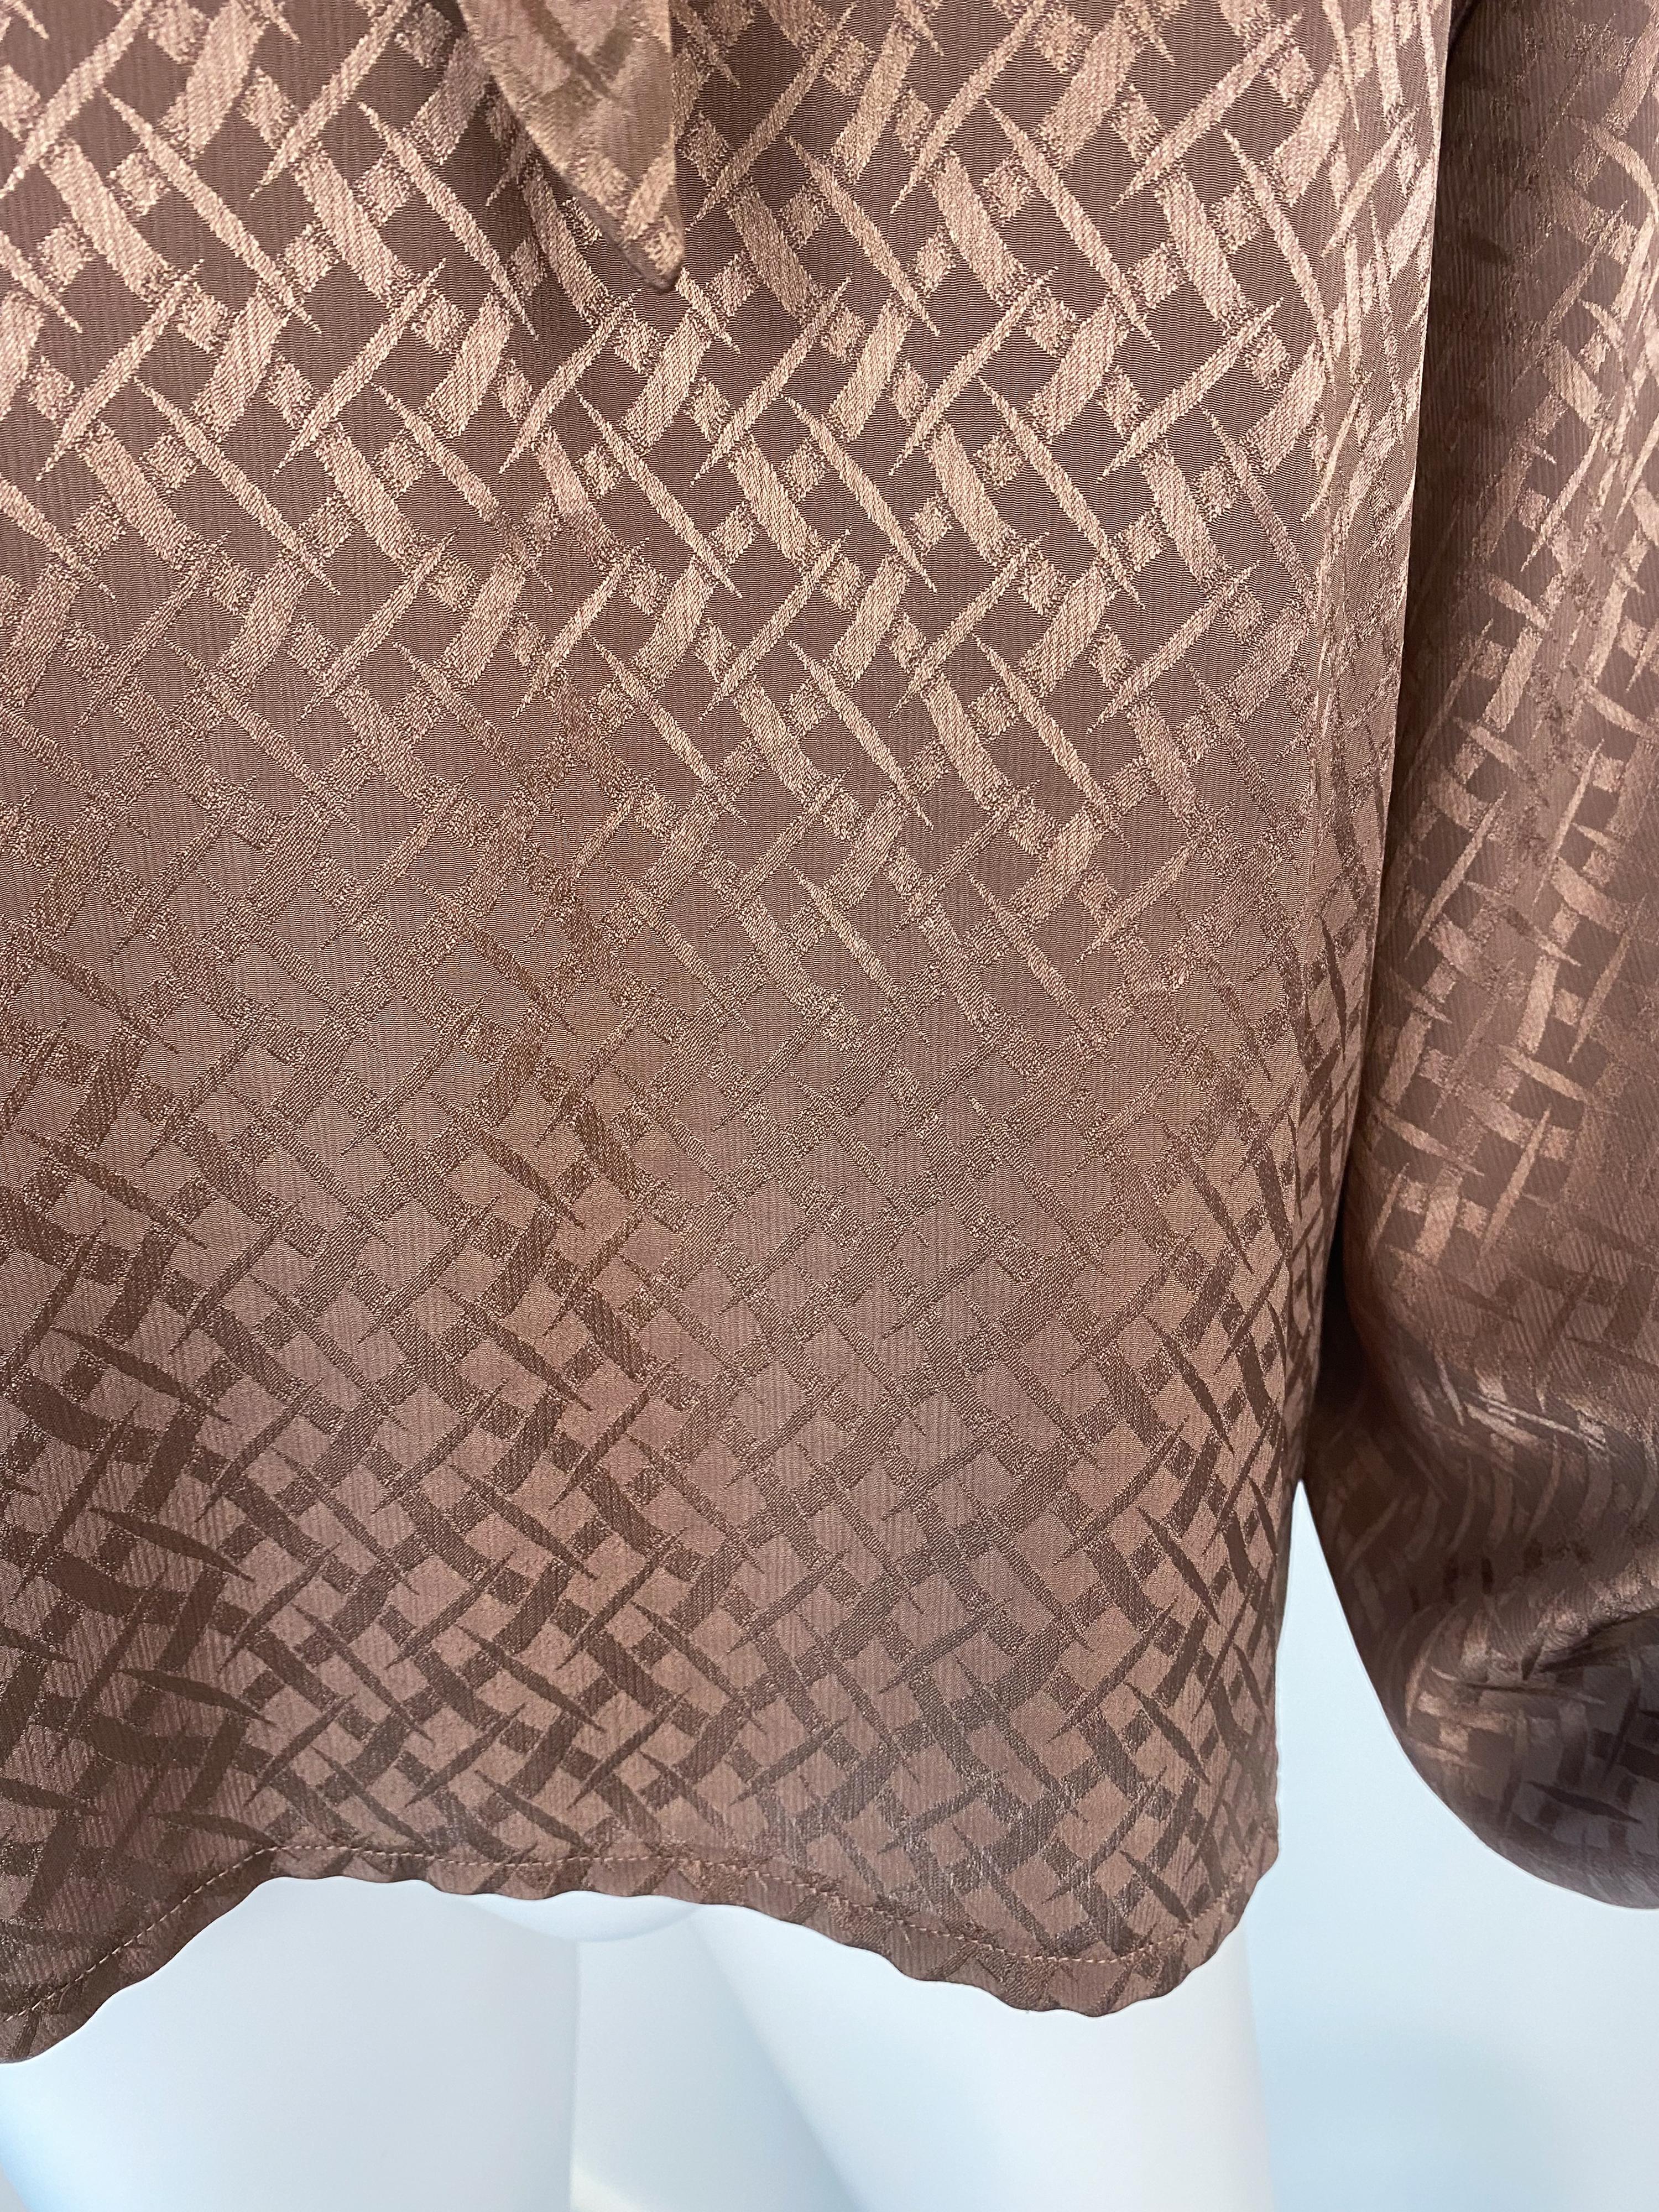 Vintage 1980s Silky Polyester Bow Blouse Top Brown Geometric Print Size 6/8 For Sale 3